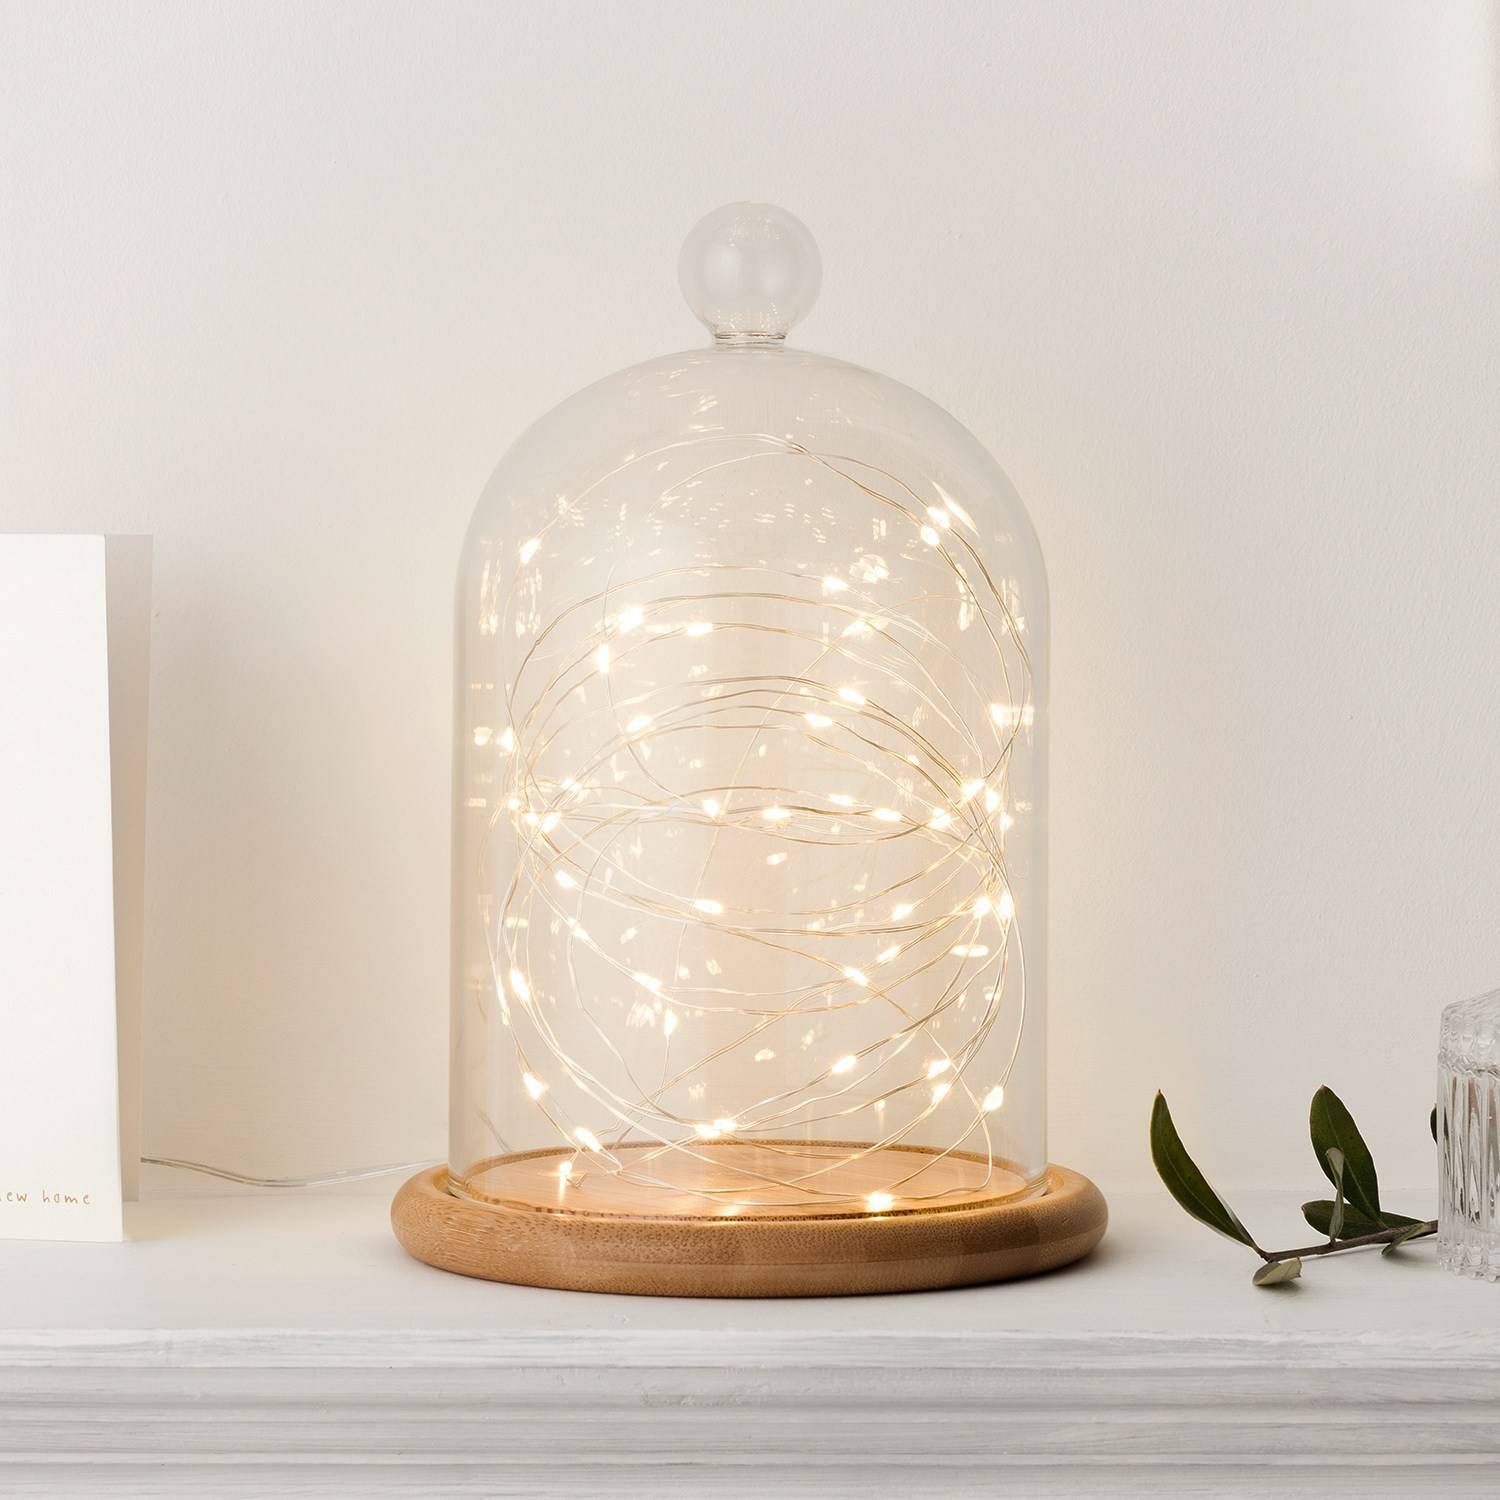 Glass dome with warm white fairy lights inside on a ,amtlepiece with a white wall background.